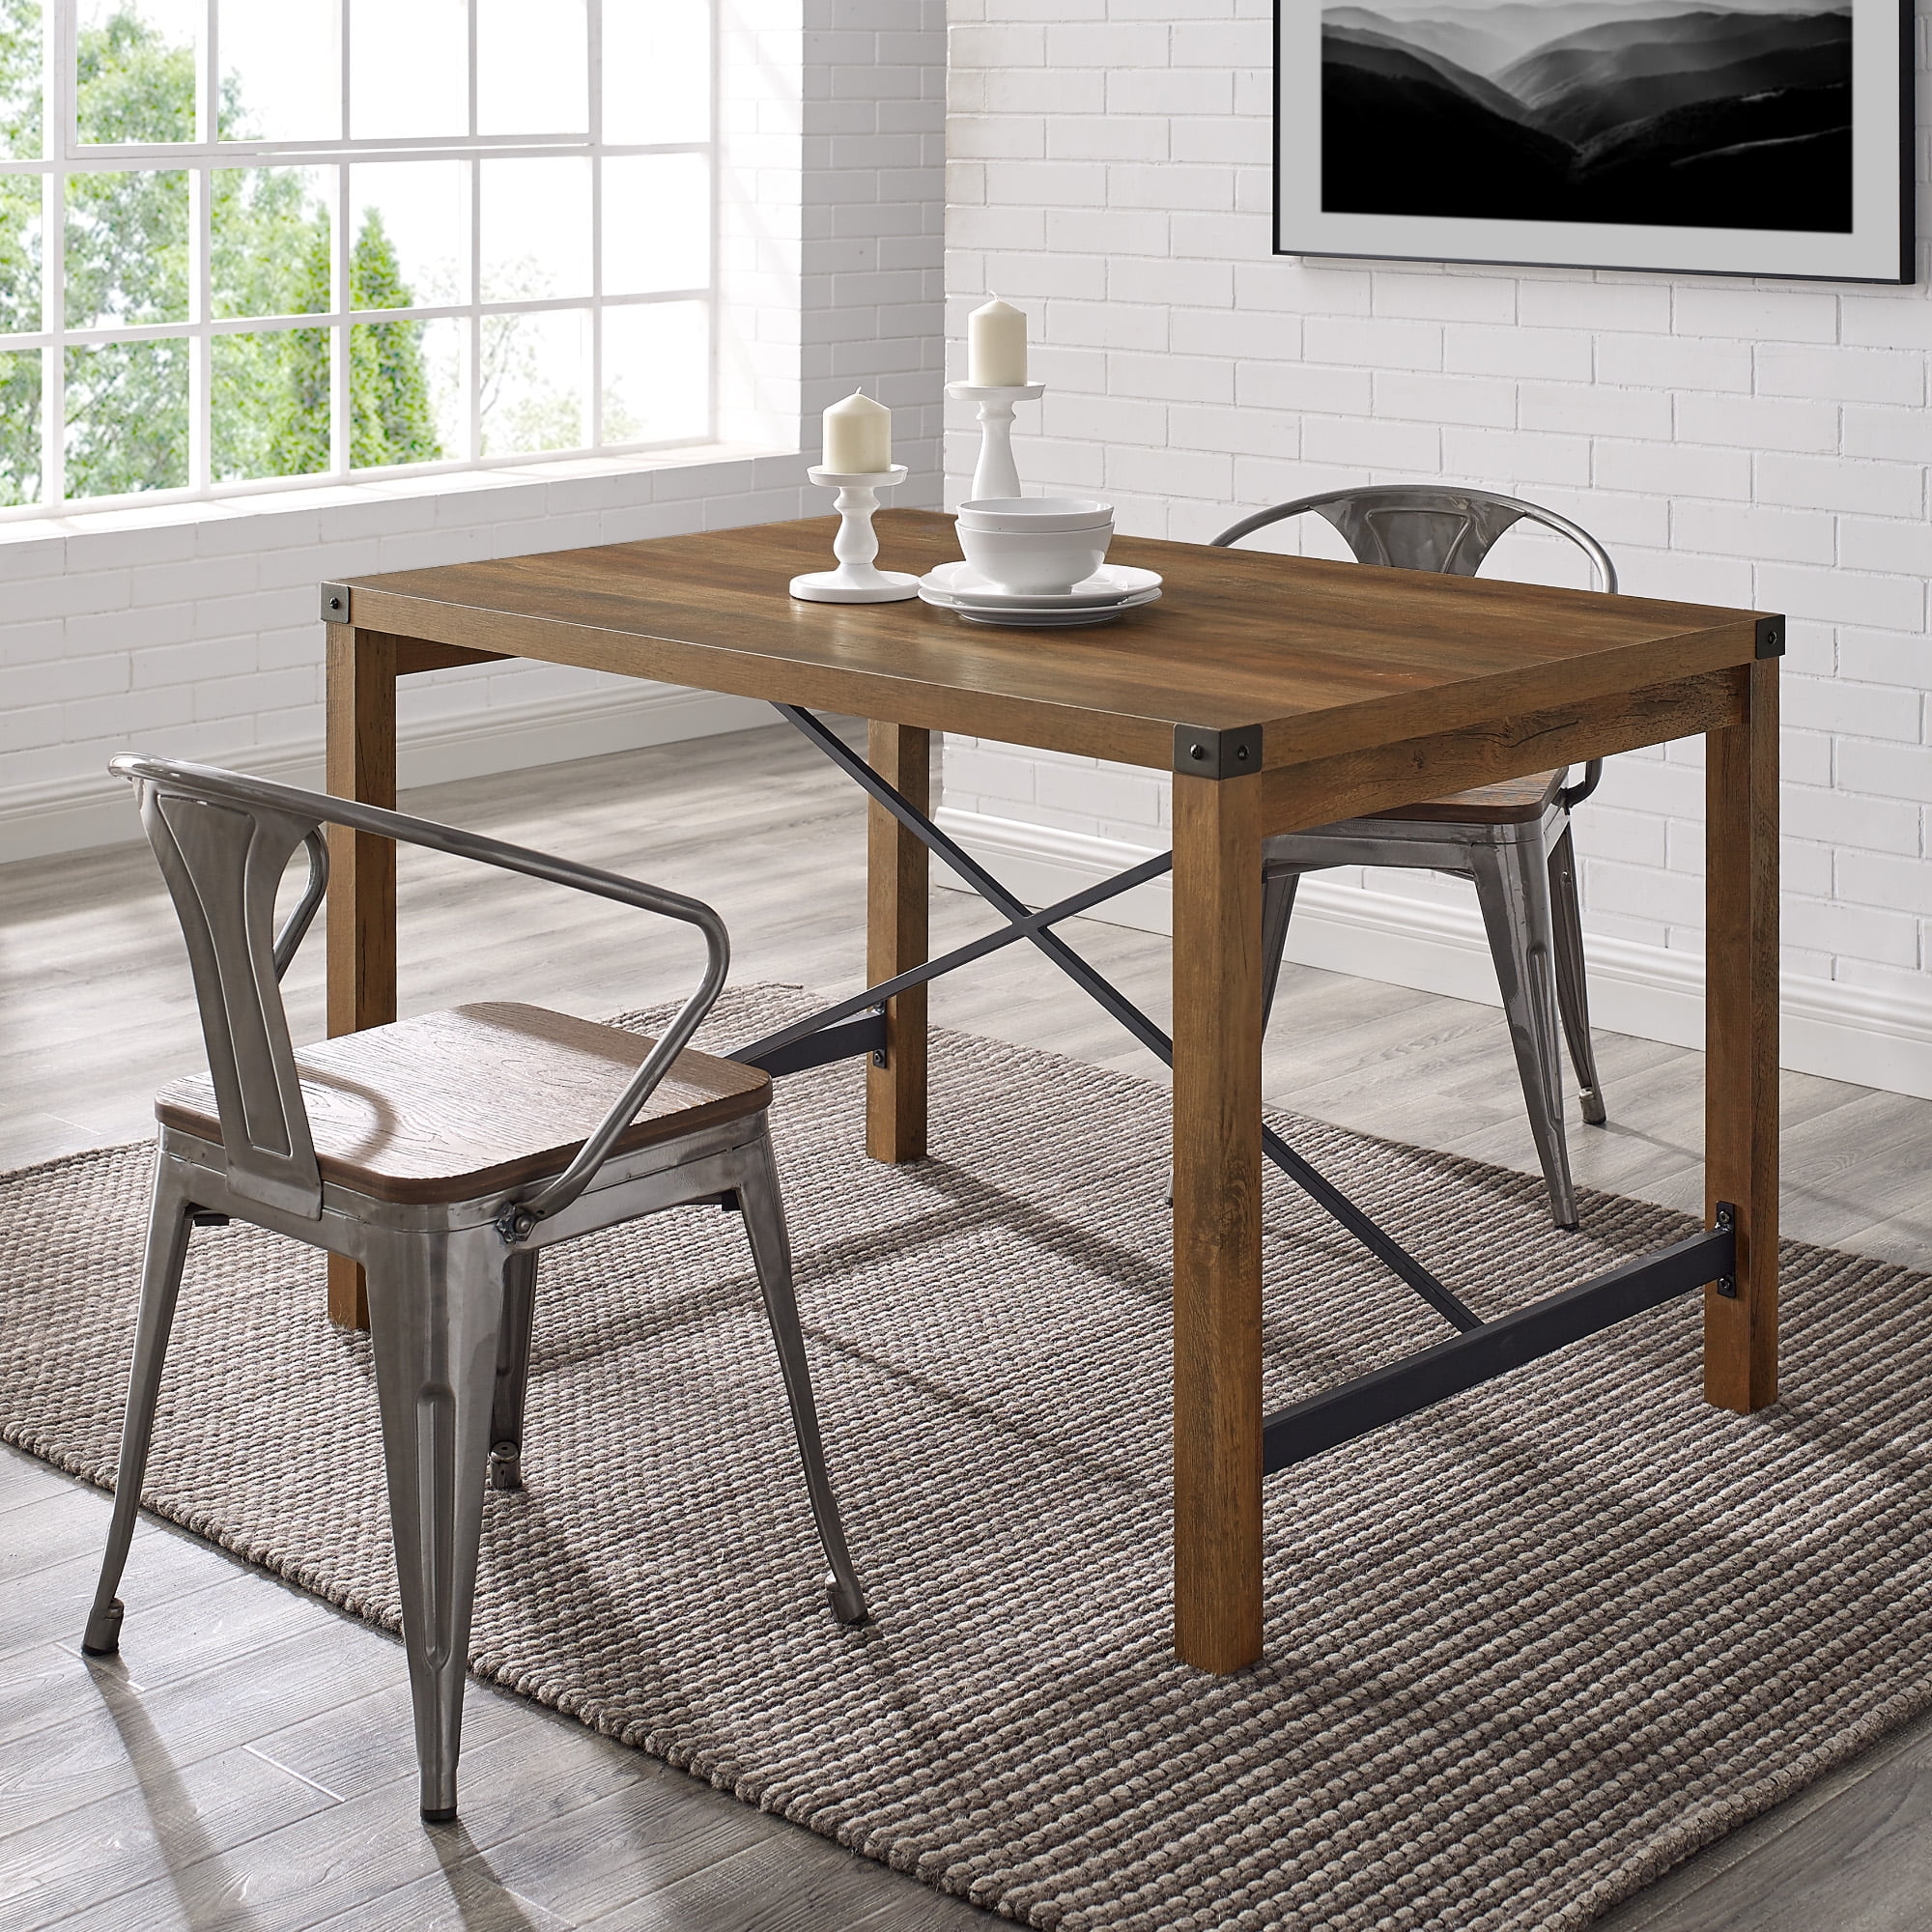  Mobili Fiver, Extendable Dining Table, Easy, Rustic Oak, Made  in Italy - Tables